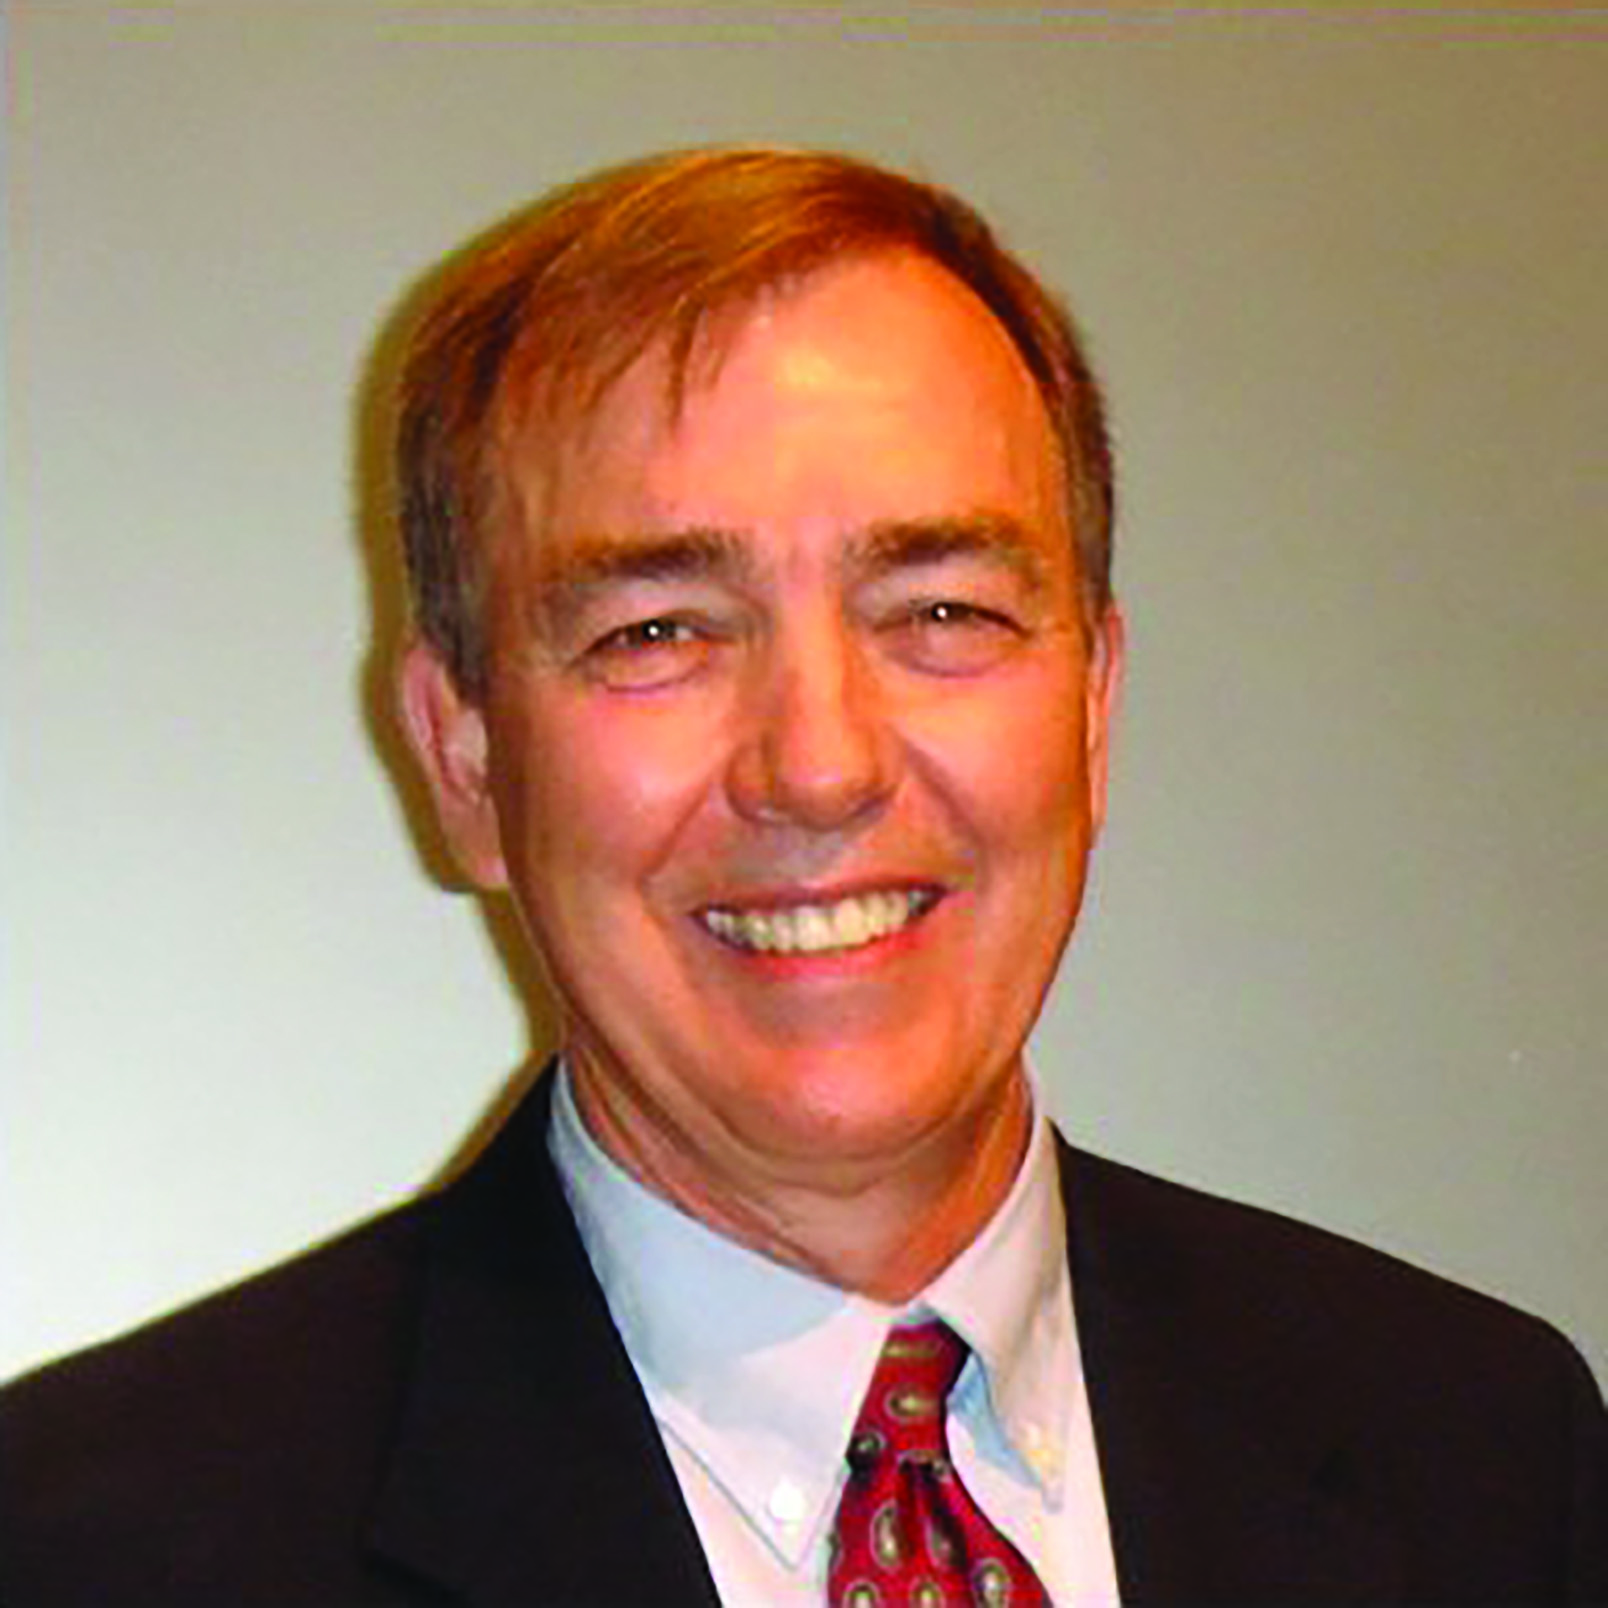 David Schrunk, MD, Board of Directors and Current Member of The Science of Laws Institute